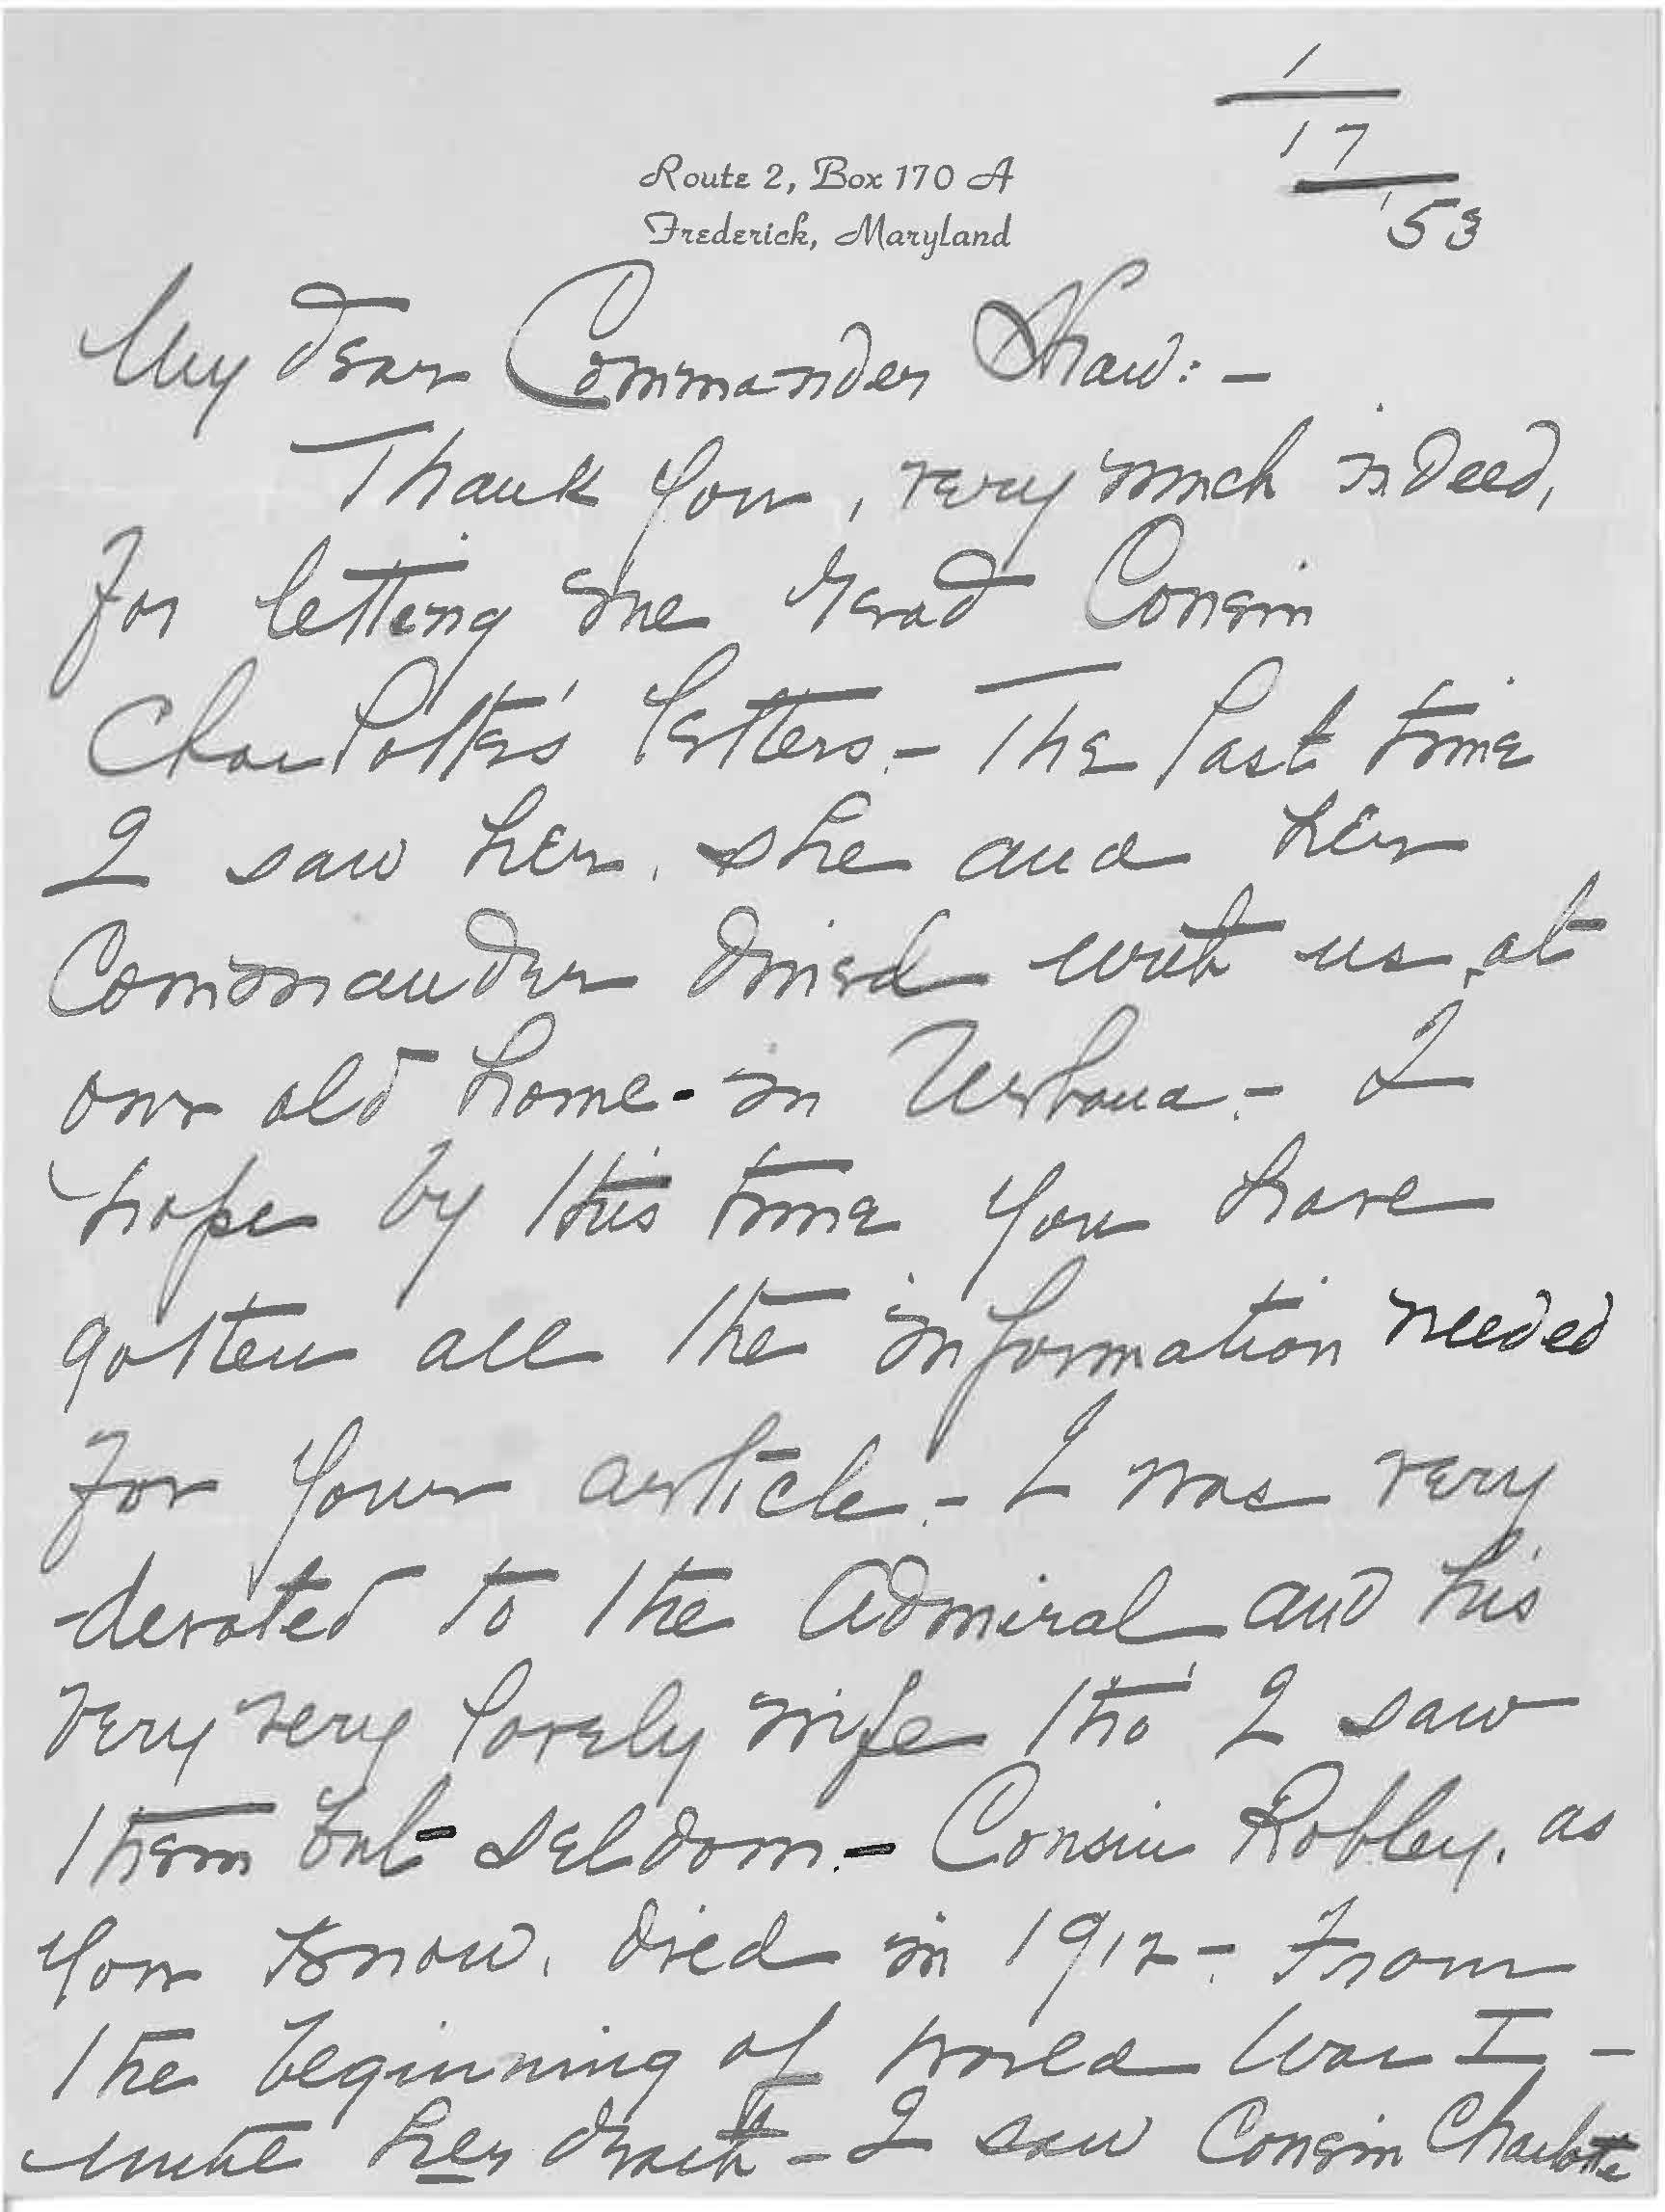 Shaw letter from Miriam Evans Kefauver